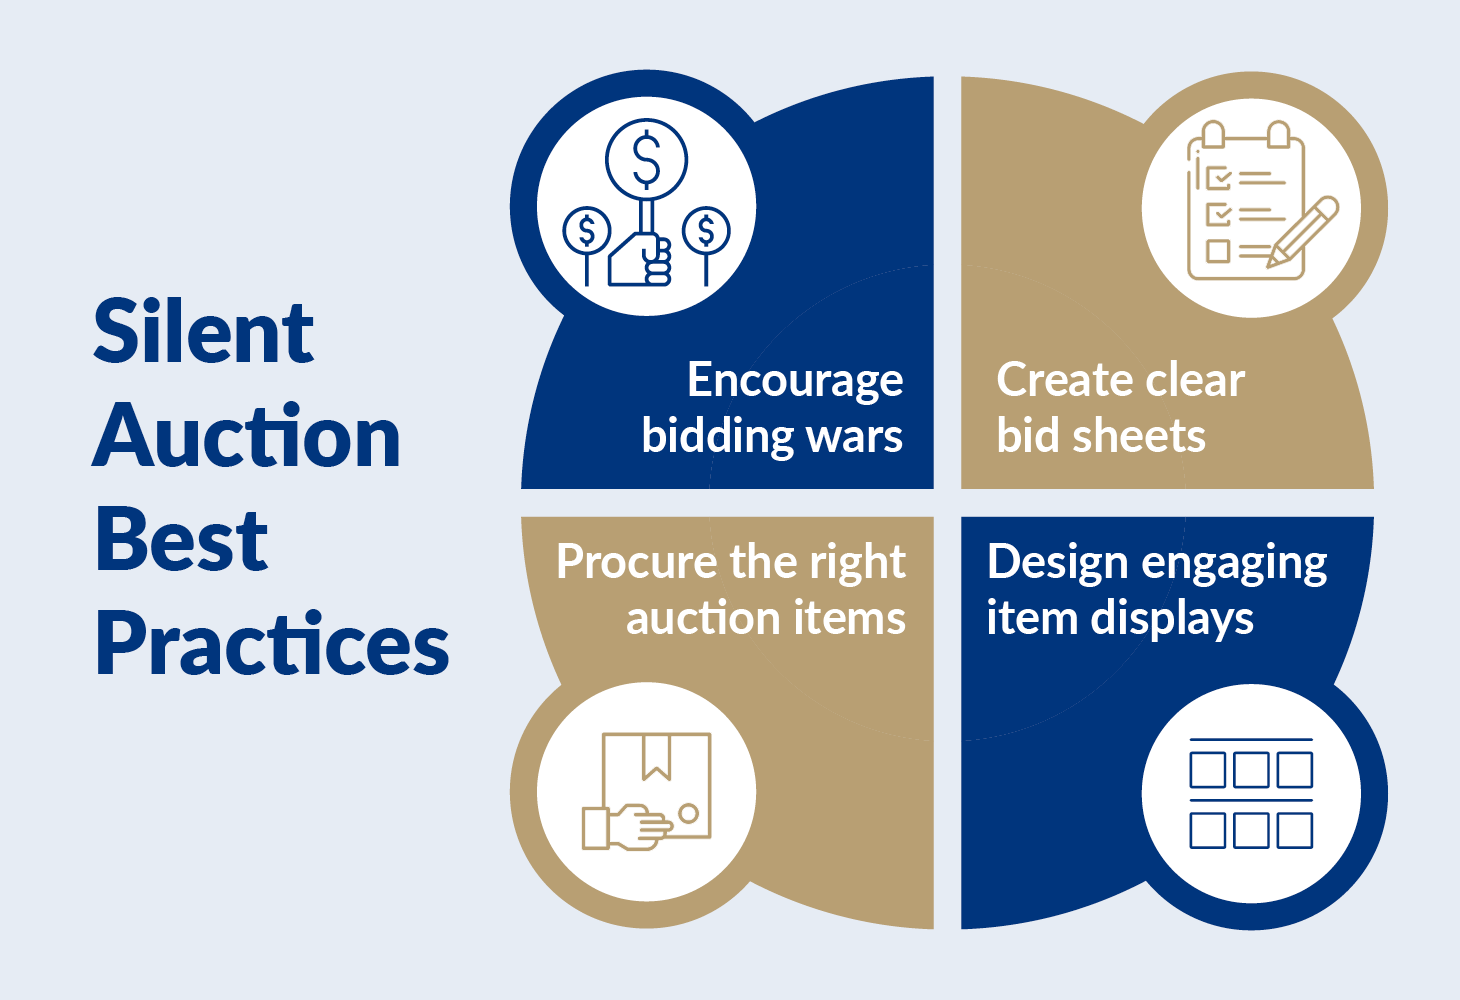 Four best practices for silent auctions in addition to creating rules, which are discussed below.